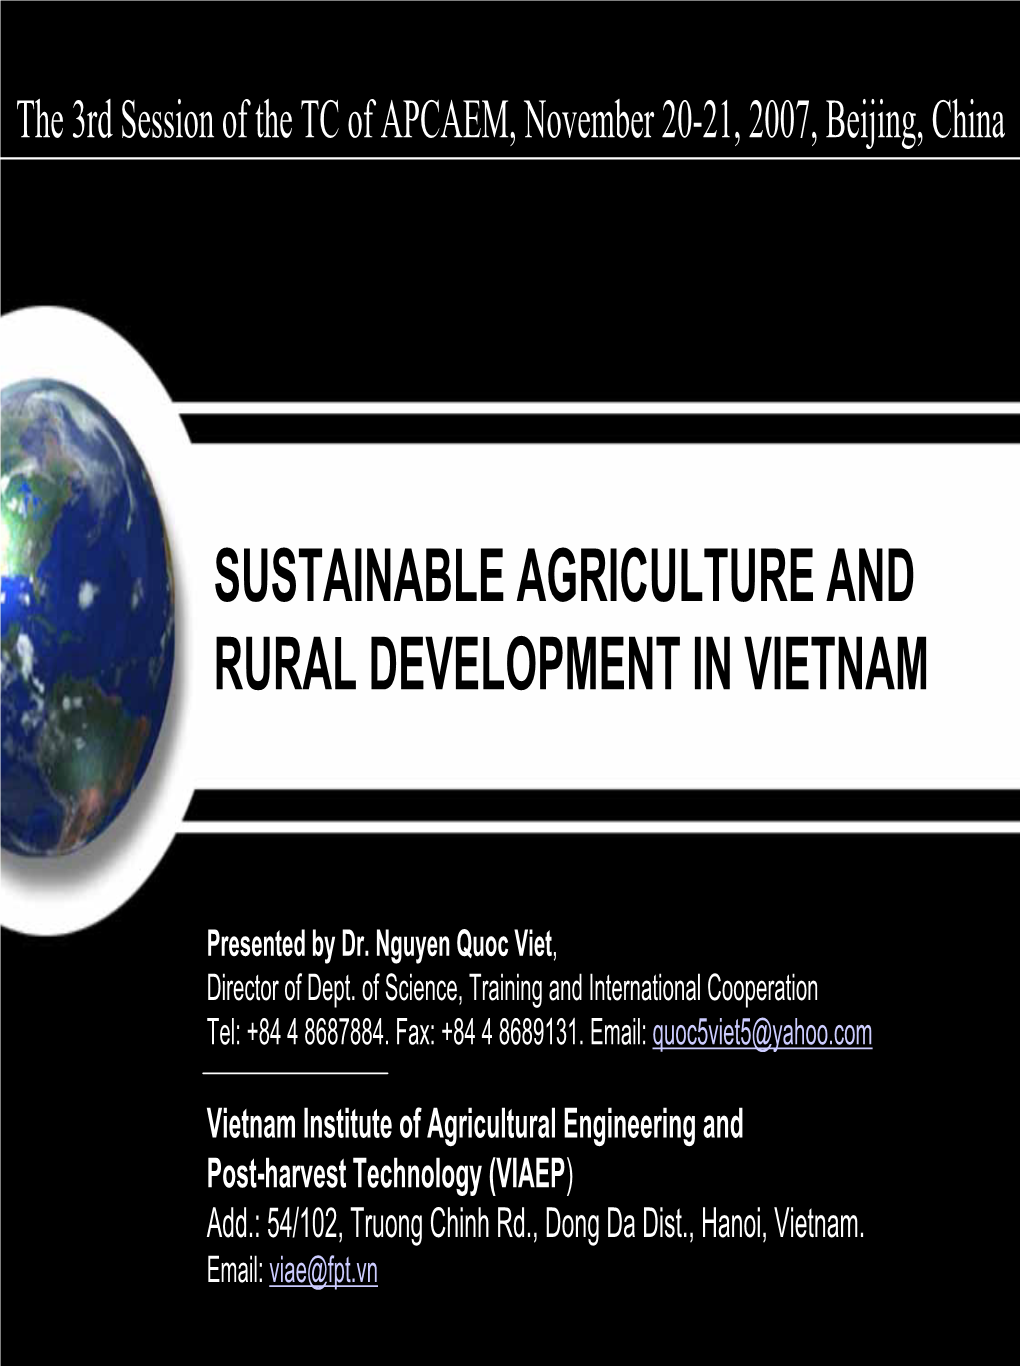 Sustainable Agriculture and Rural Development in Vietnam